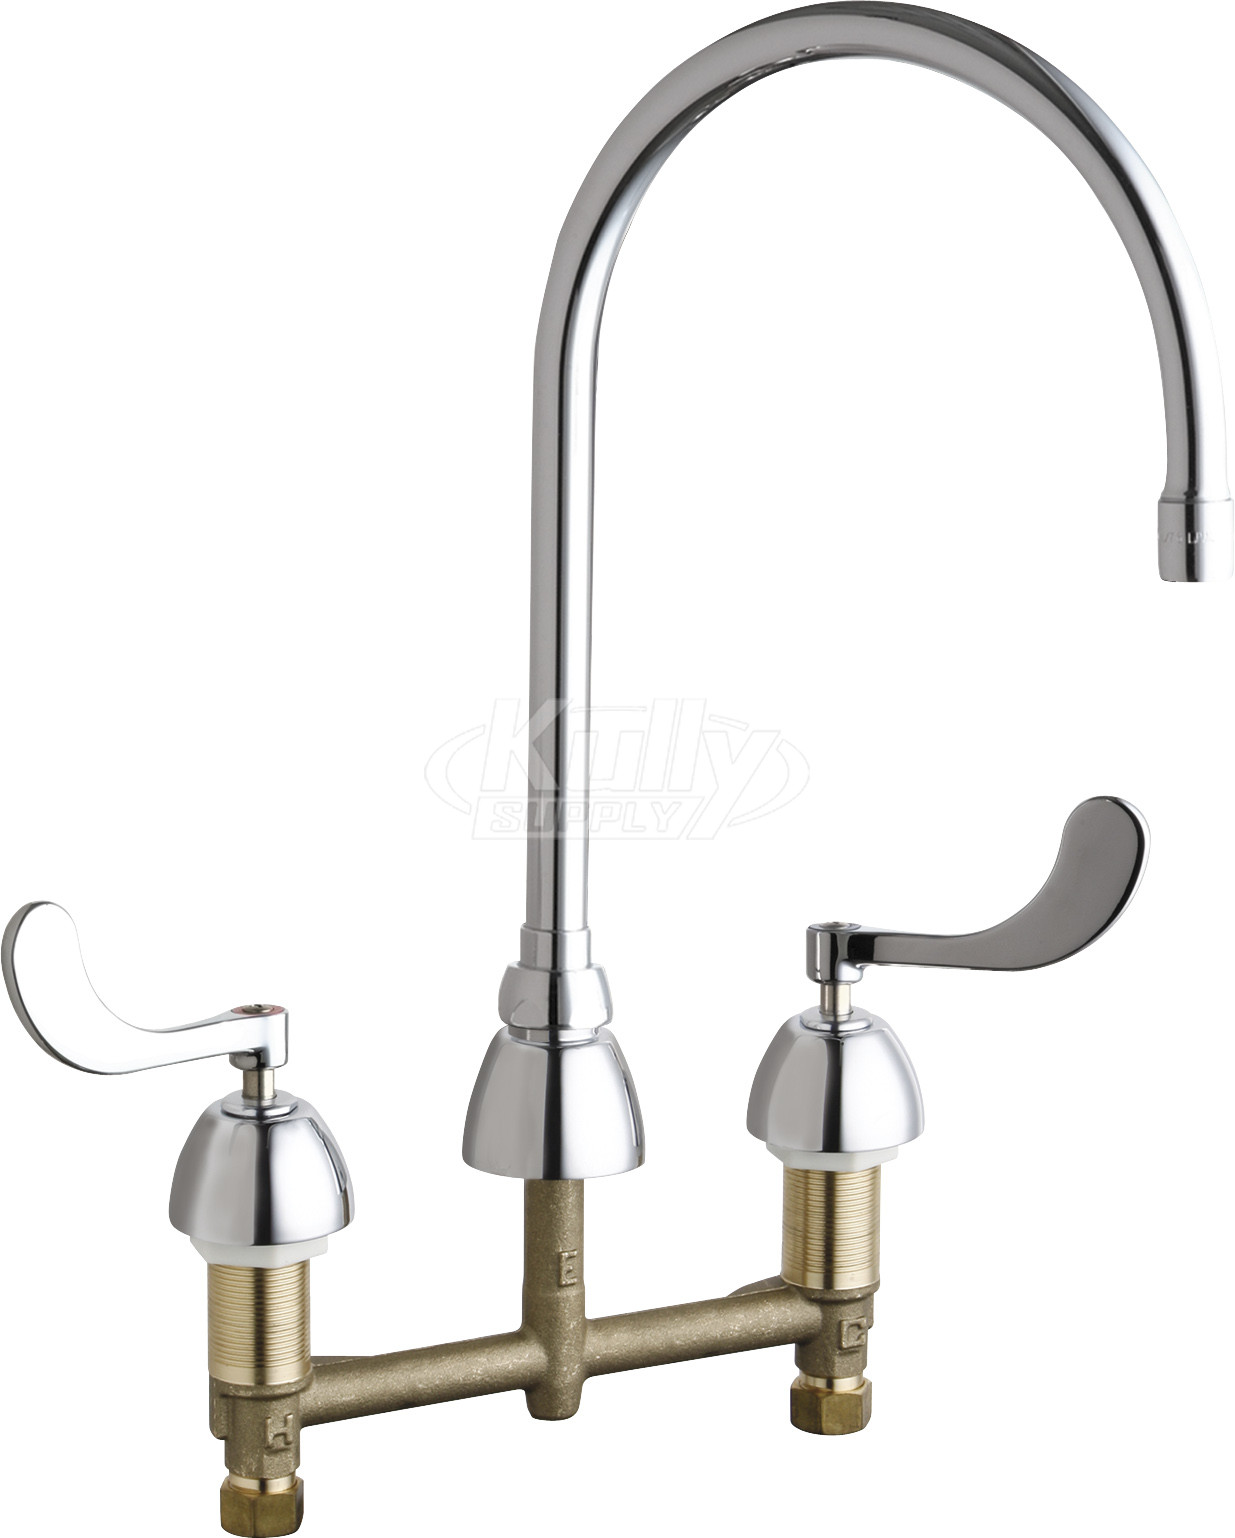 Chicago 786-GN8AE35ABCP Concealed Hot and Cold Water Sink Faucet